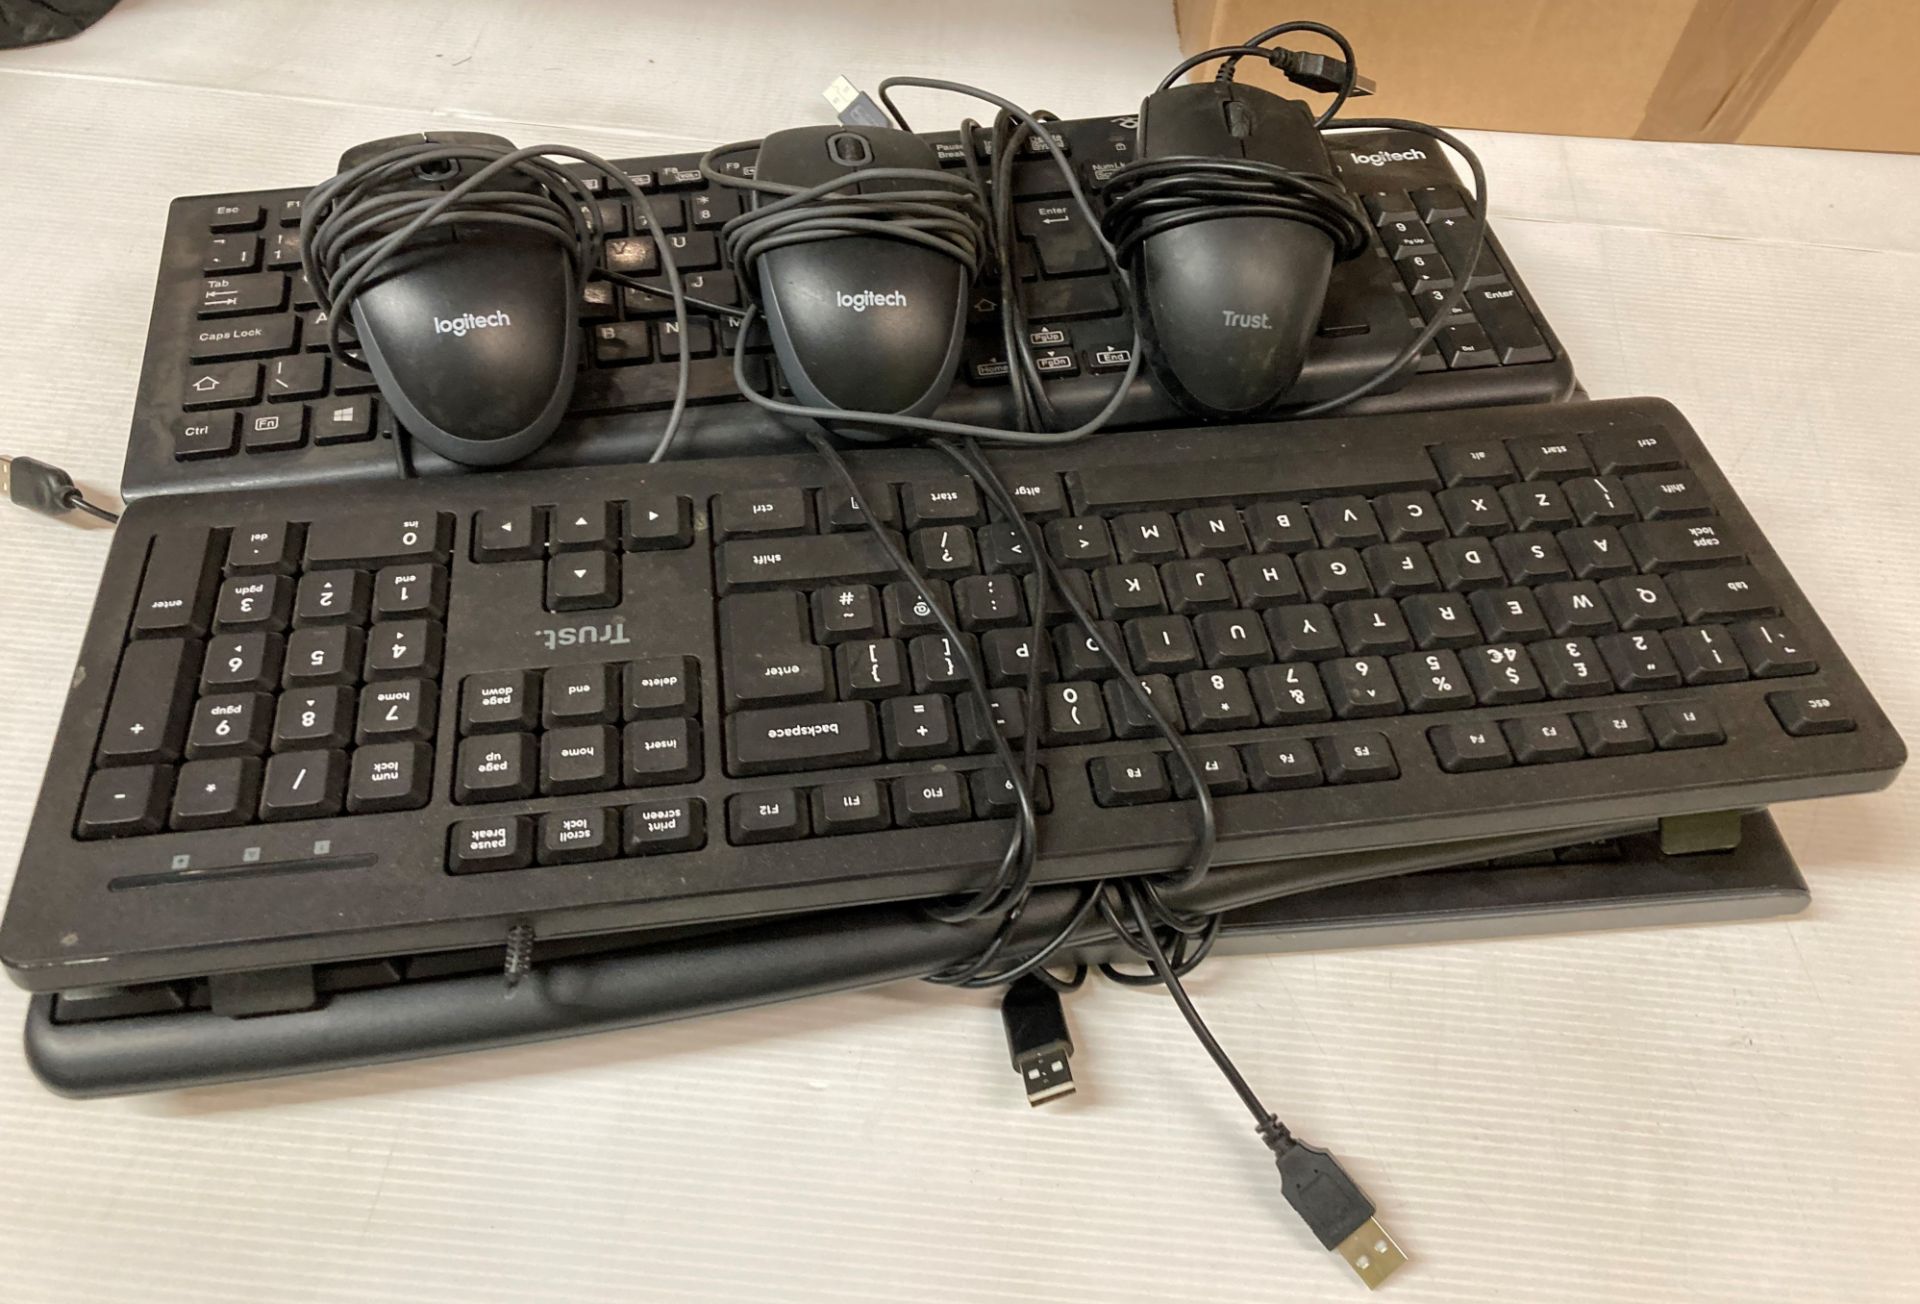 6 x Assorted keyboards and 3 x mice (M11)